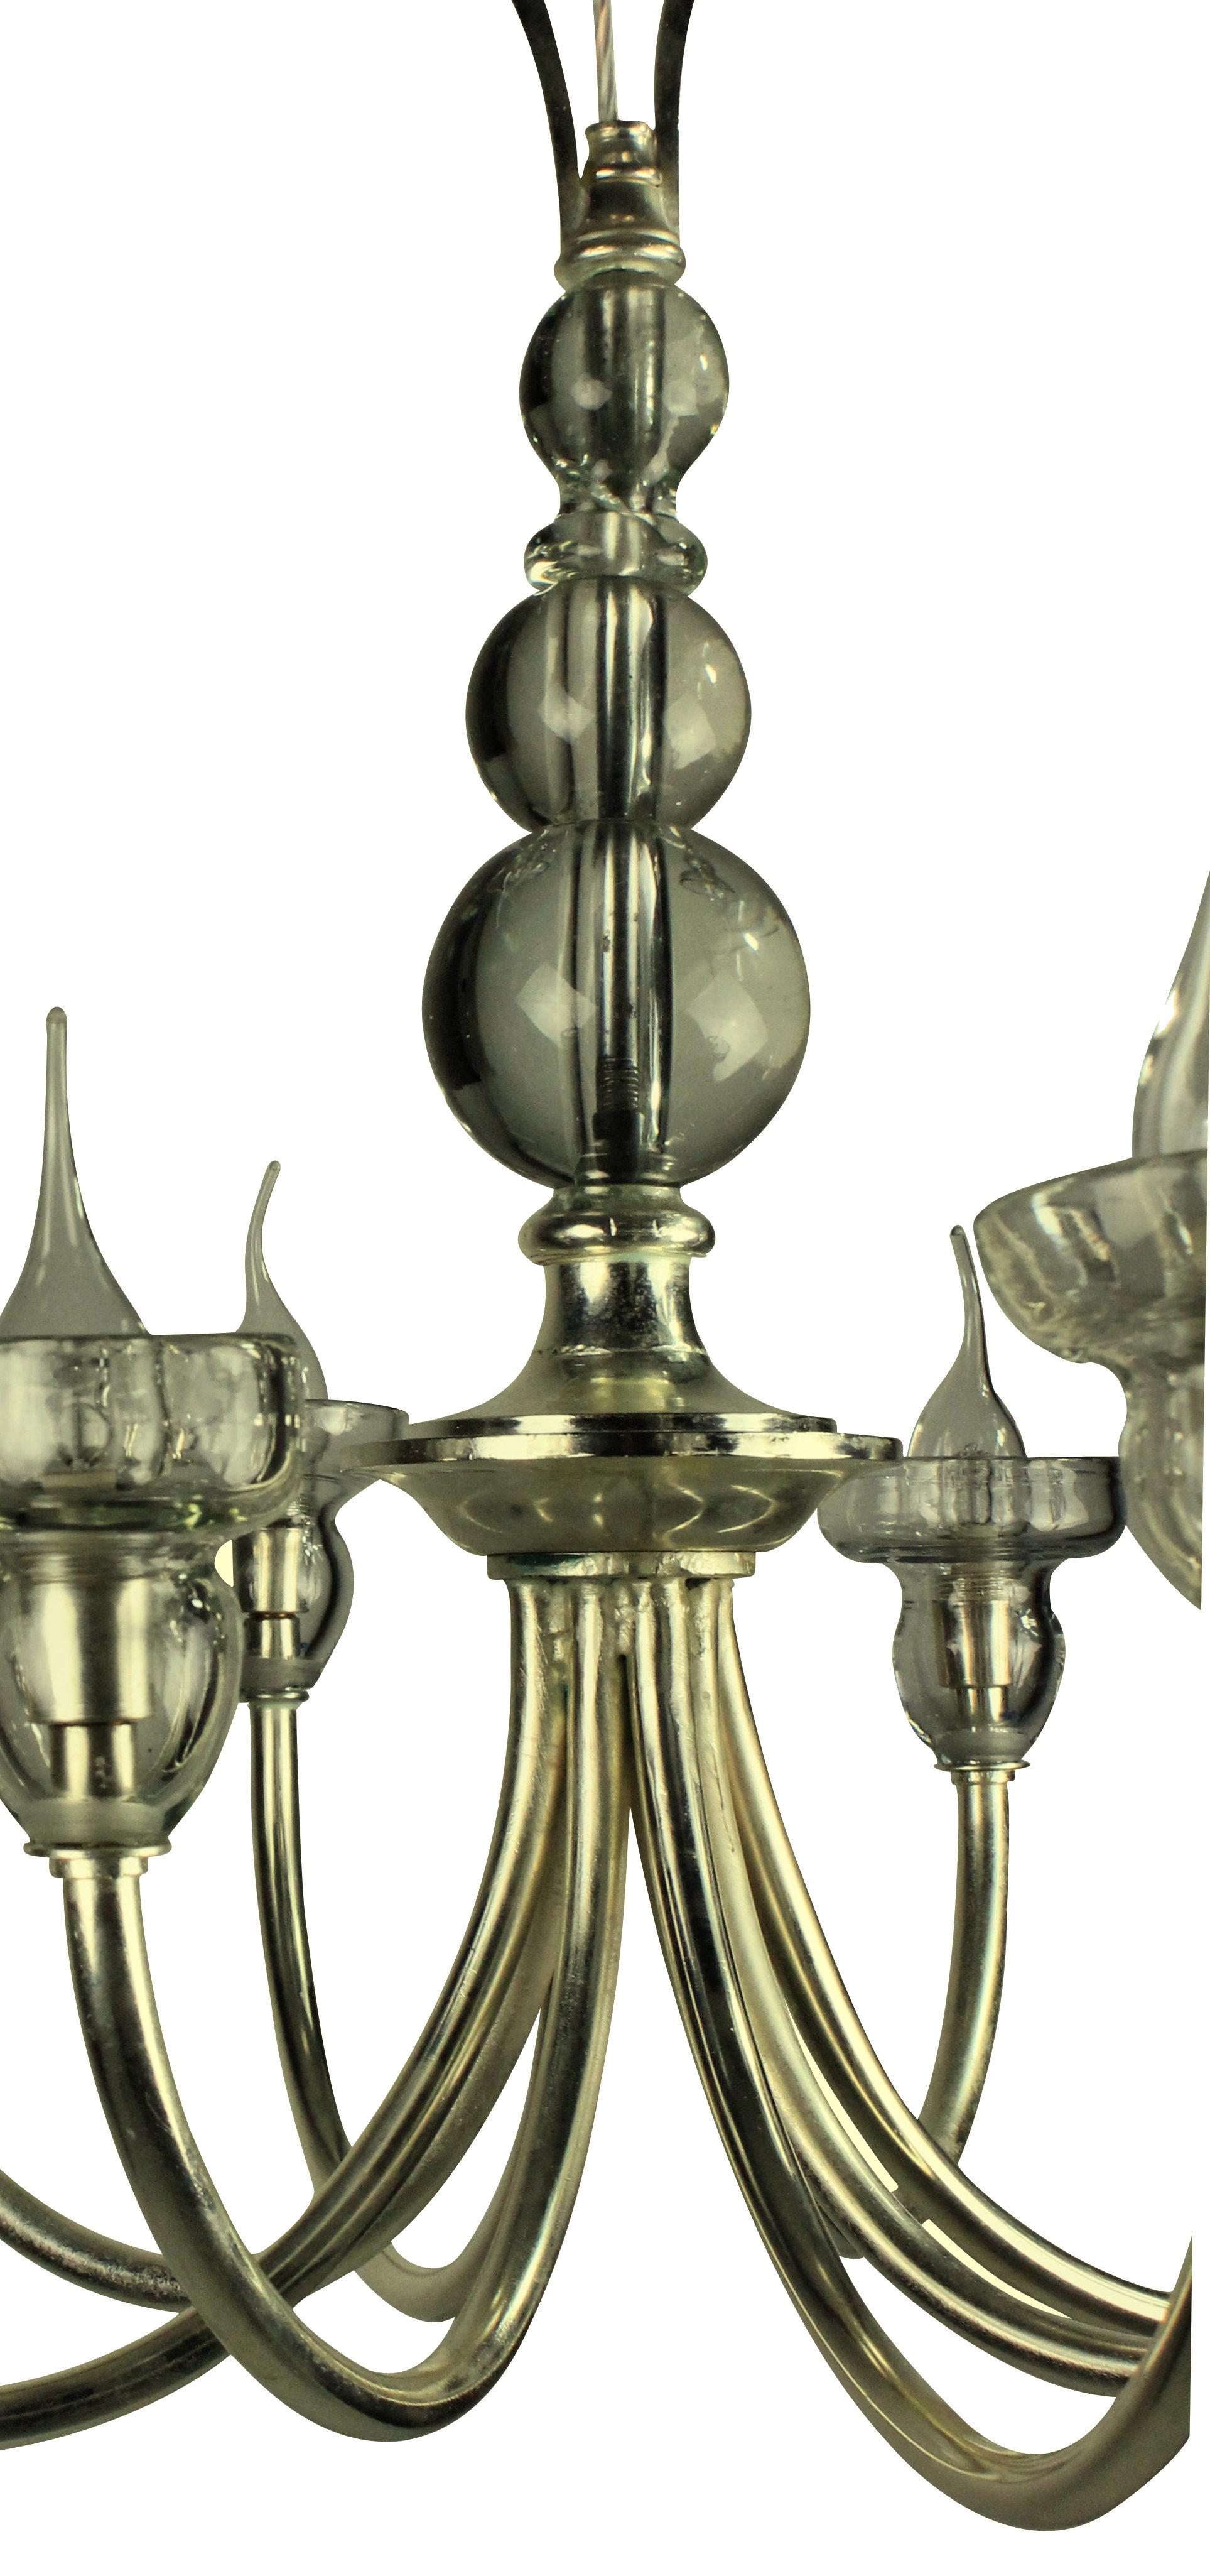 A French chandelier of interesting design in silvered metal with good quality glass detailing, with a spherical centre stem and drip sconces.